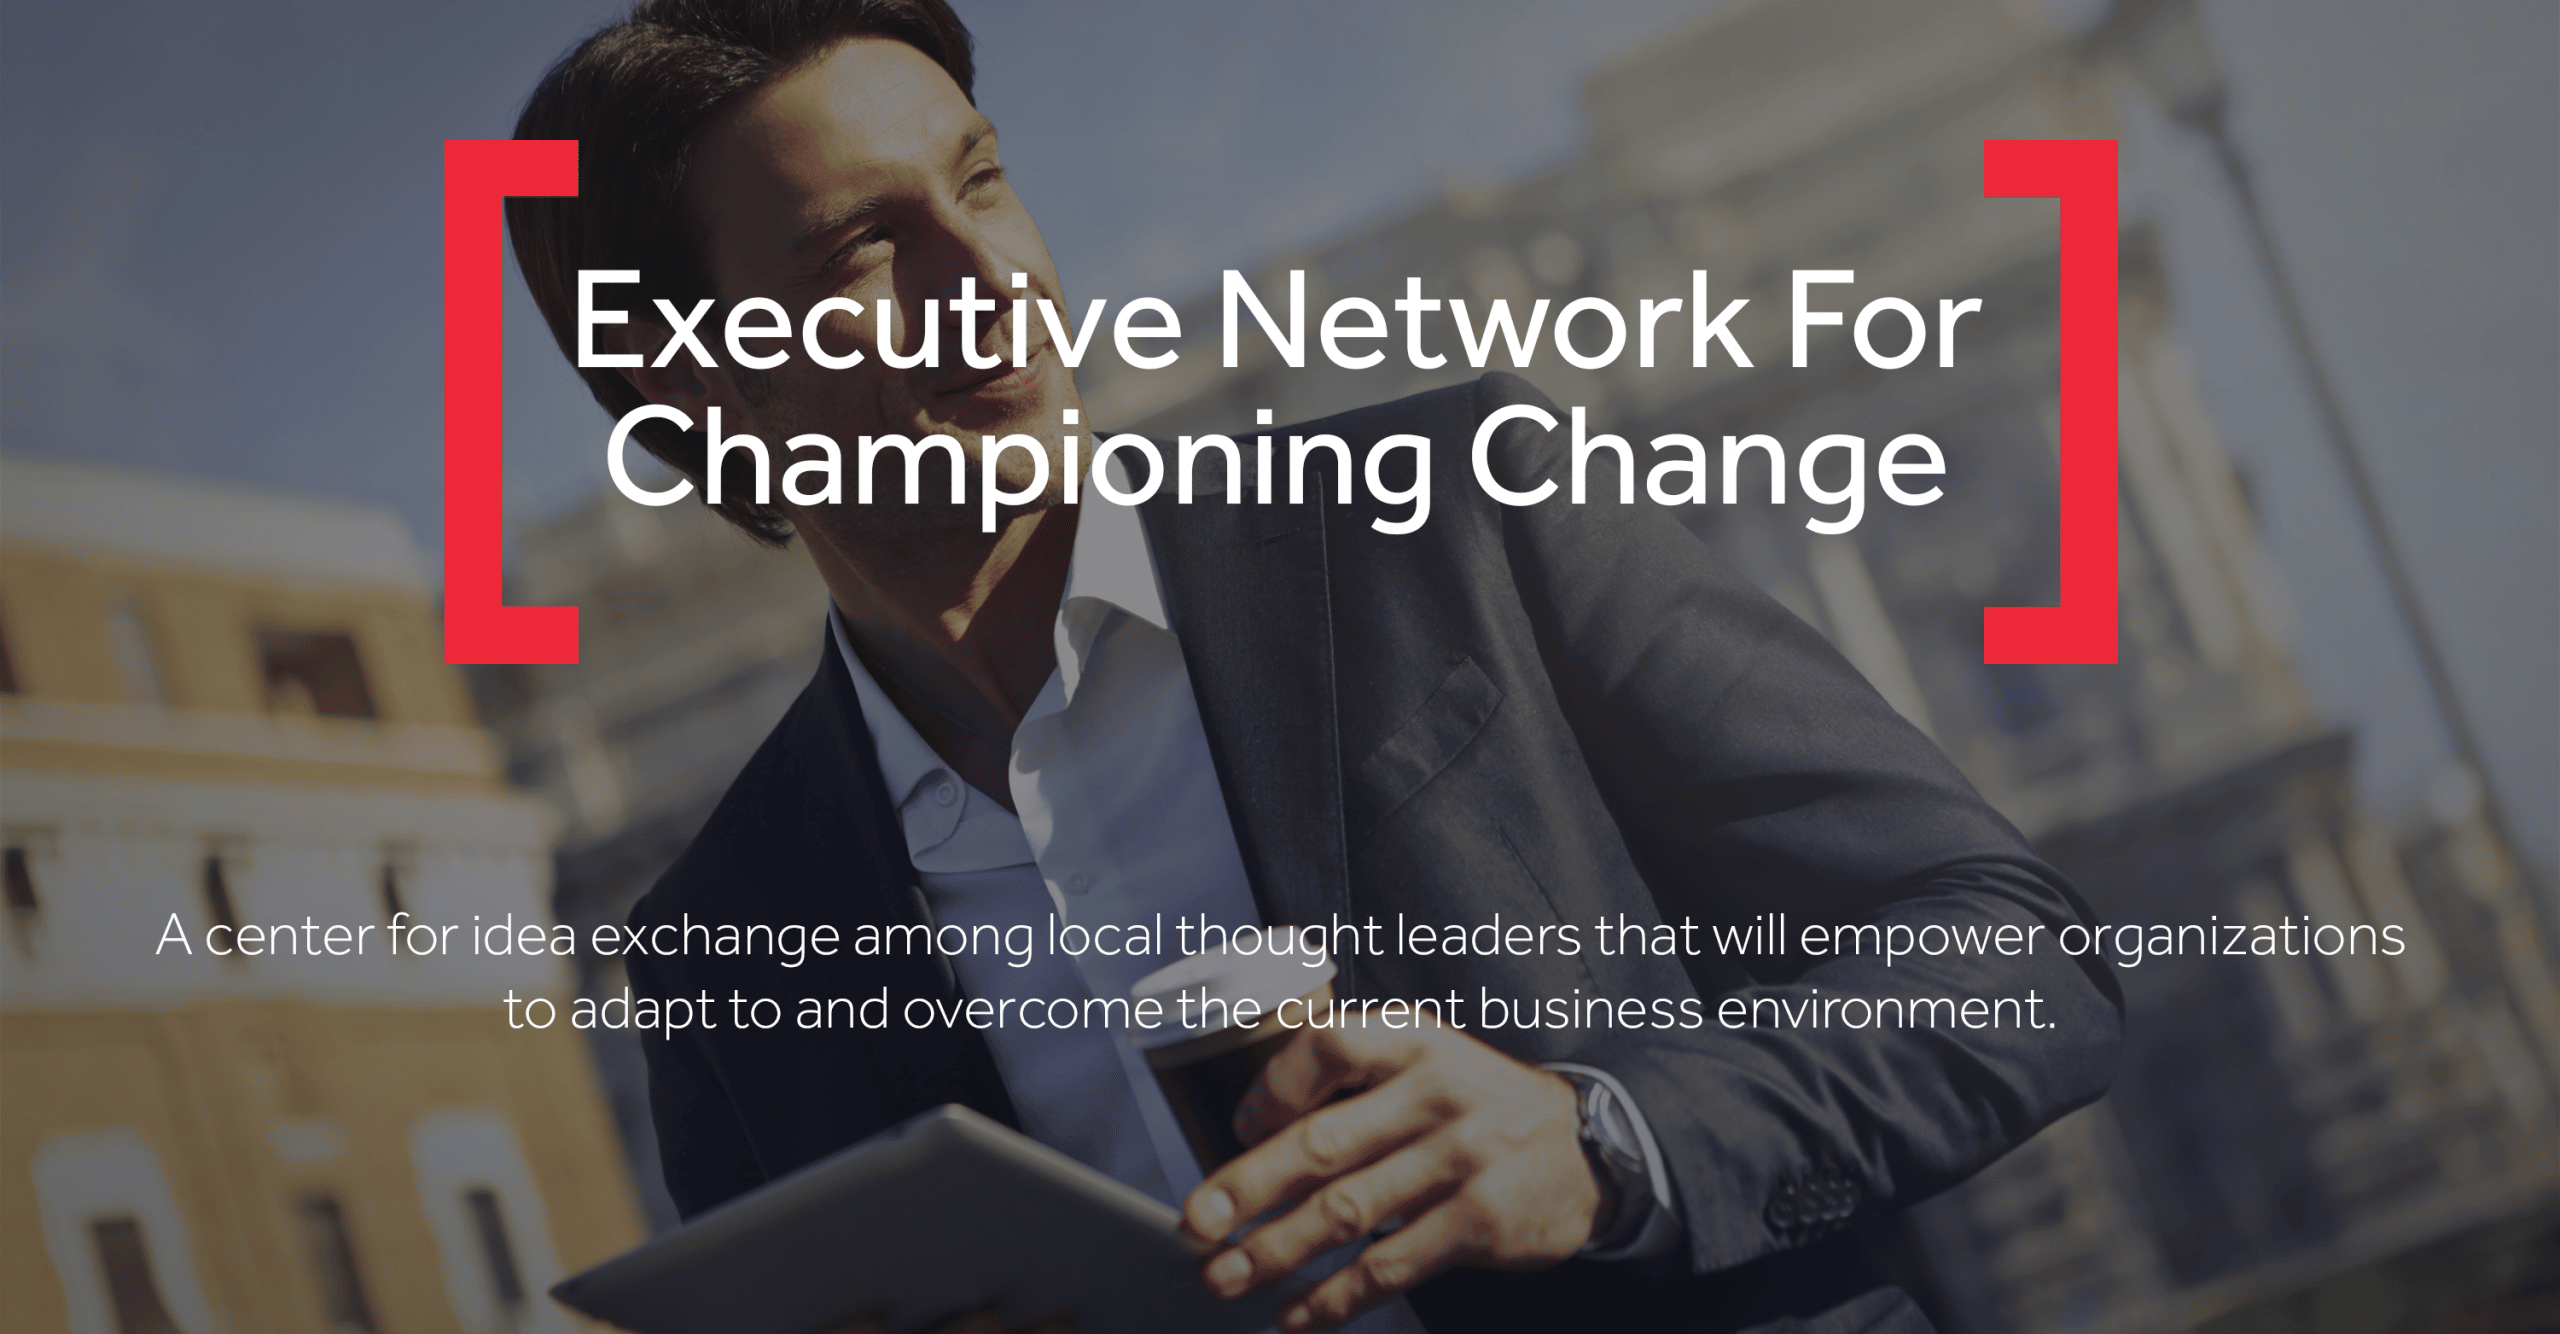 Executive Network For Championing Change